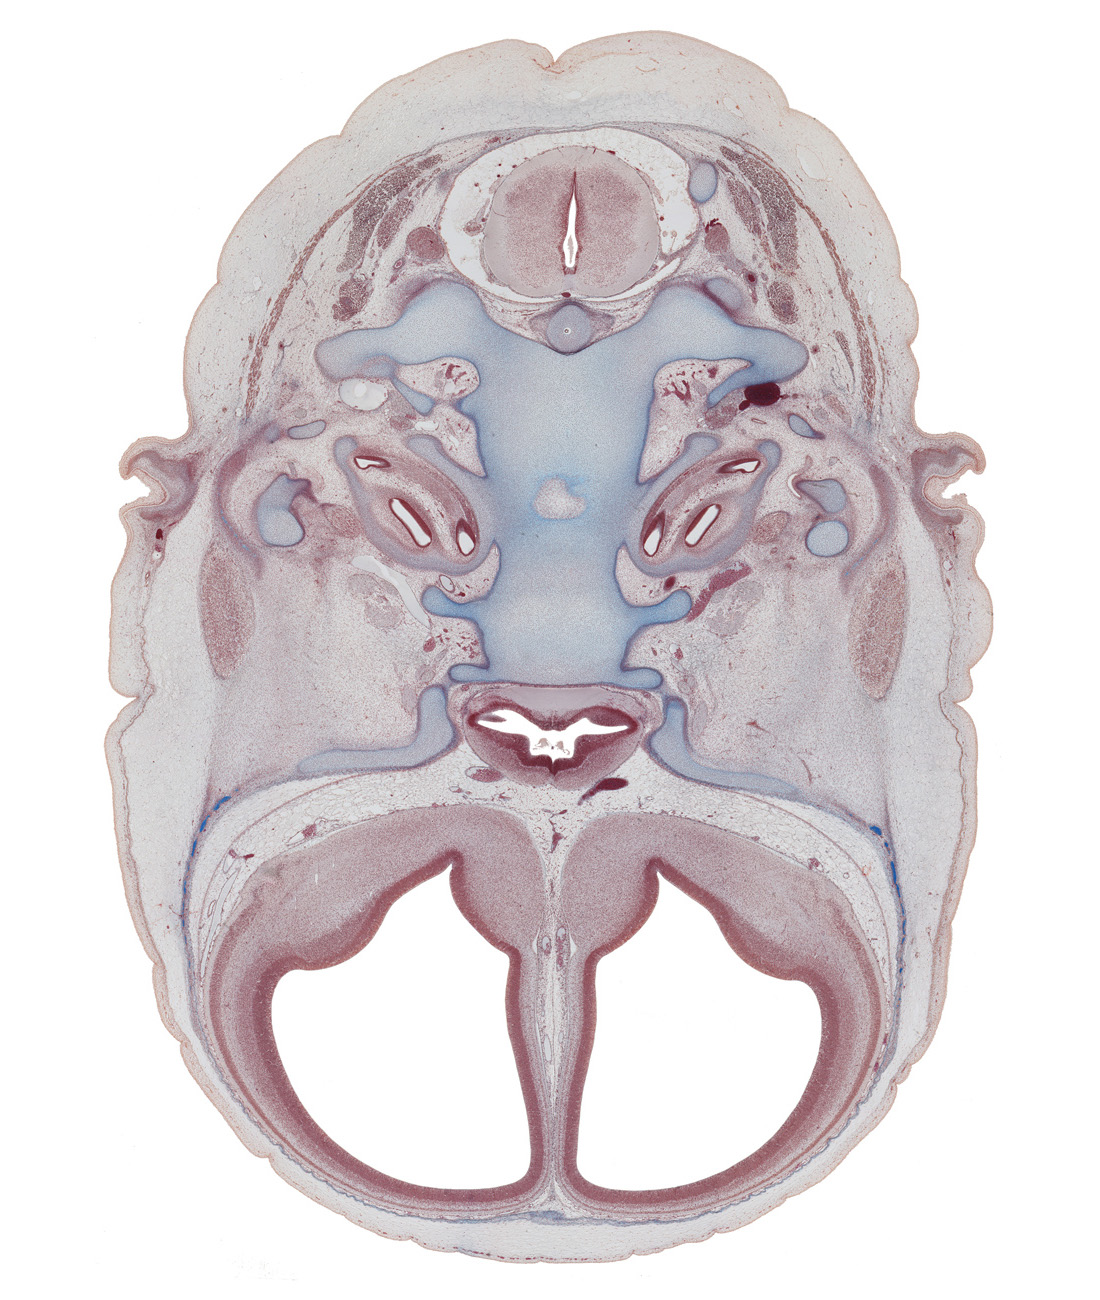 C-1 spinal ganglion, basi-occipital (basal plate), basisphenoid, edge of cranial cavity, facial nerve (CN VII), greater wing of sphenoid, hippocampus, hypoglossal canal, incus, internal carotid artery, lateral ventricle, lateral ventricular eminence (telencephalon), lesser wing of sphenoid, malleus, mandibular nerve (CN V₃), maxillary nerve (CN V₂), neural arch of C-1 vertebra (atlas), nucleus accumbens, occipital condyle, ophthalmic nerve (CN V₁), optic canal, optic chiasma (chiasmatic plate), optic groove, pre-optic area, vertebral artery